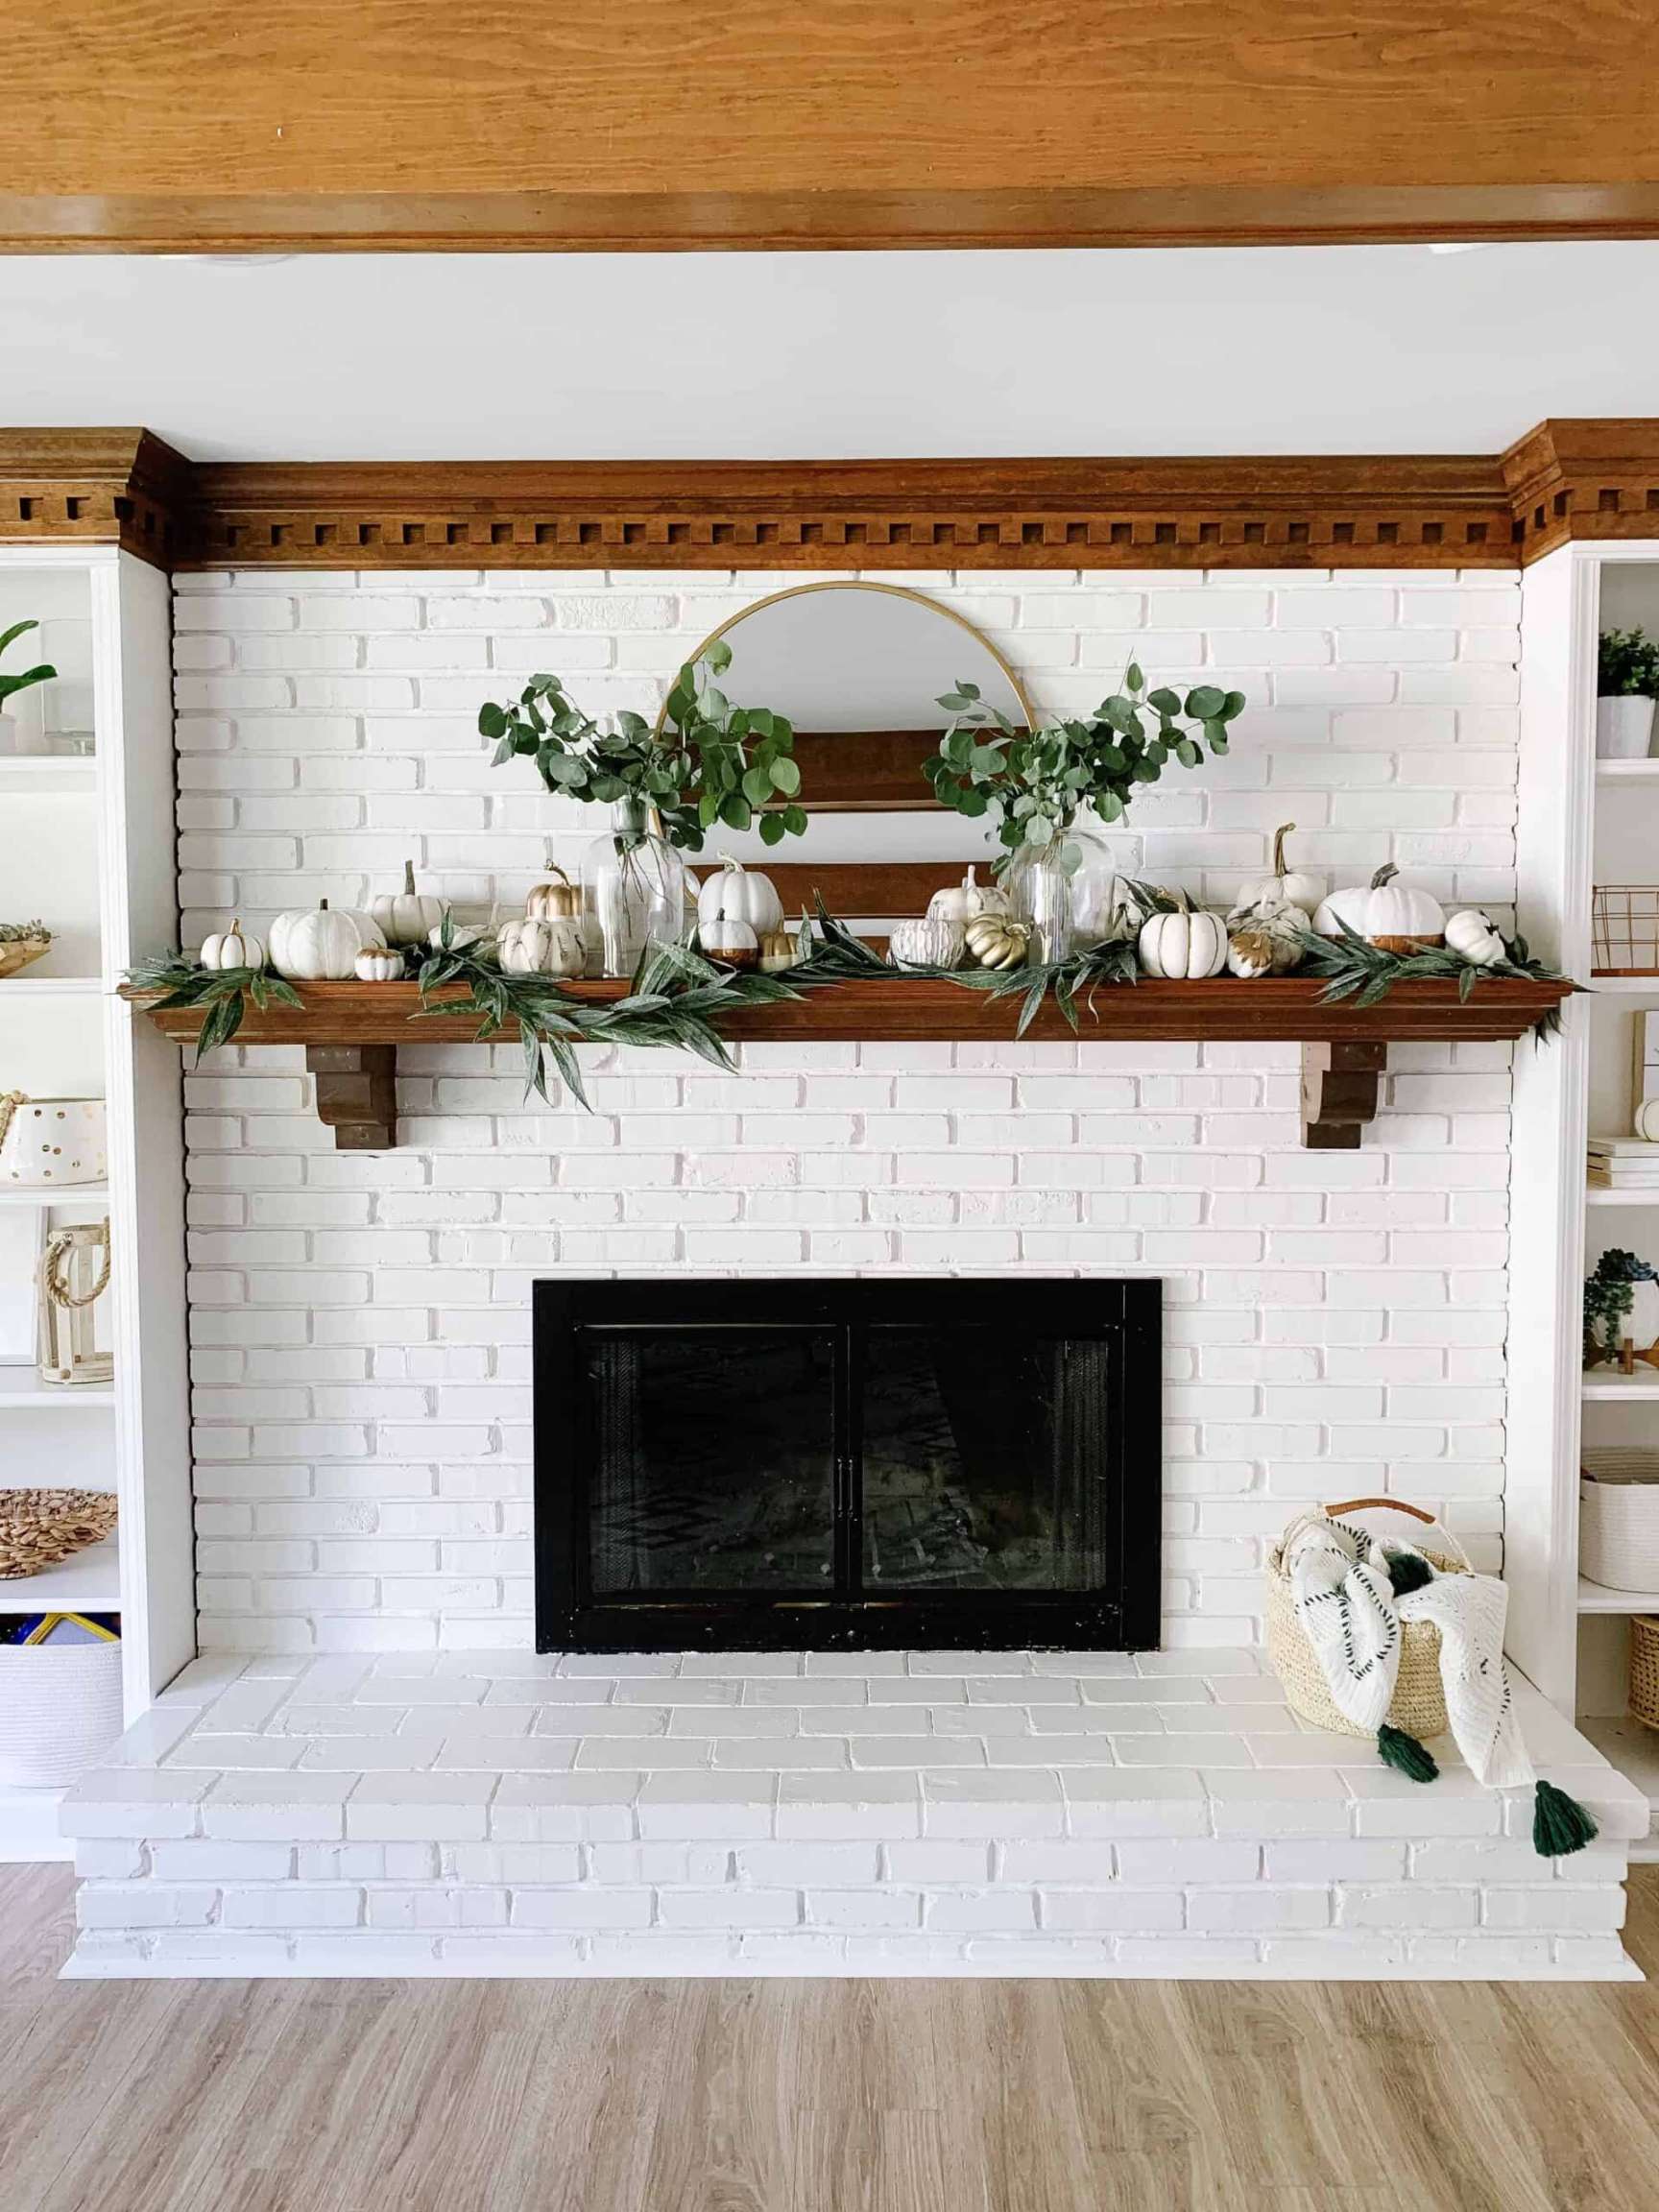 Painting Stone Fireplaces:  Fireplaces Where Paint Created a Cozy